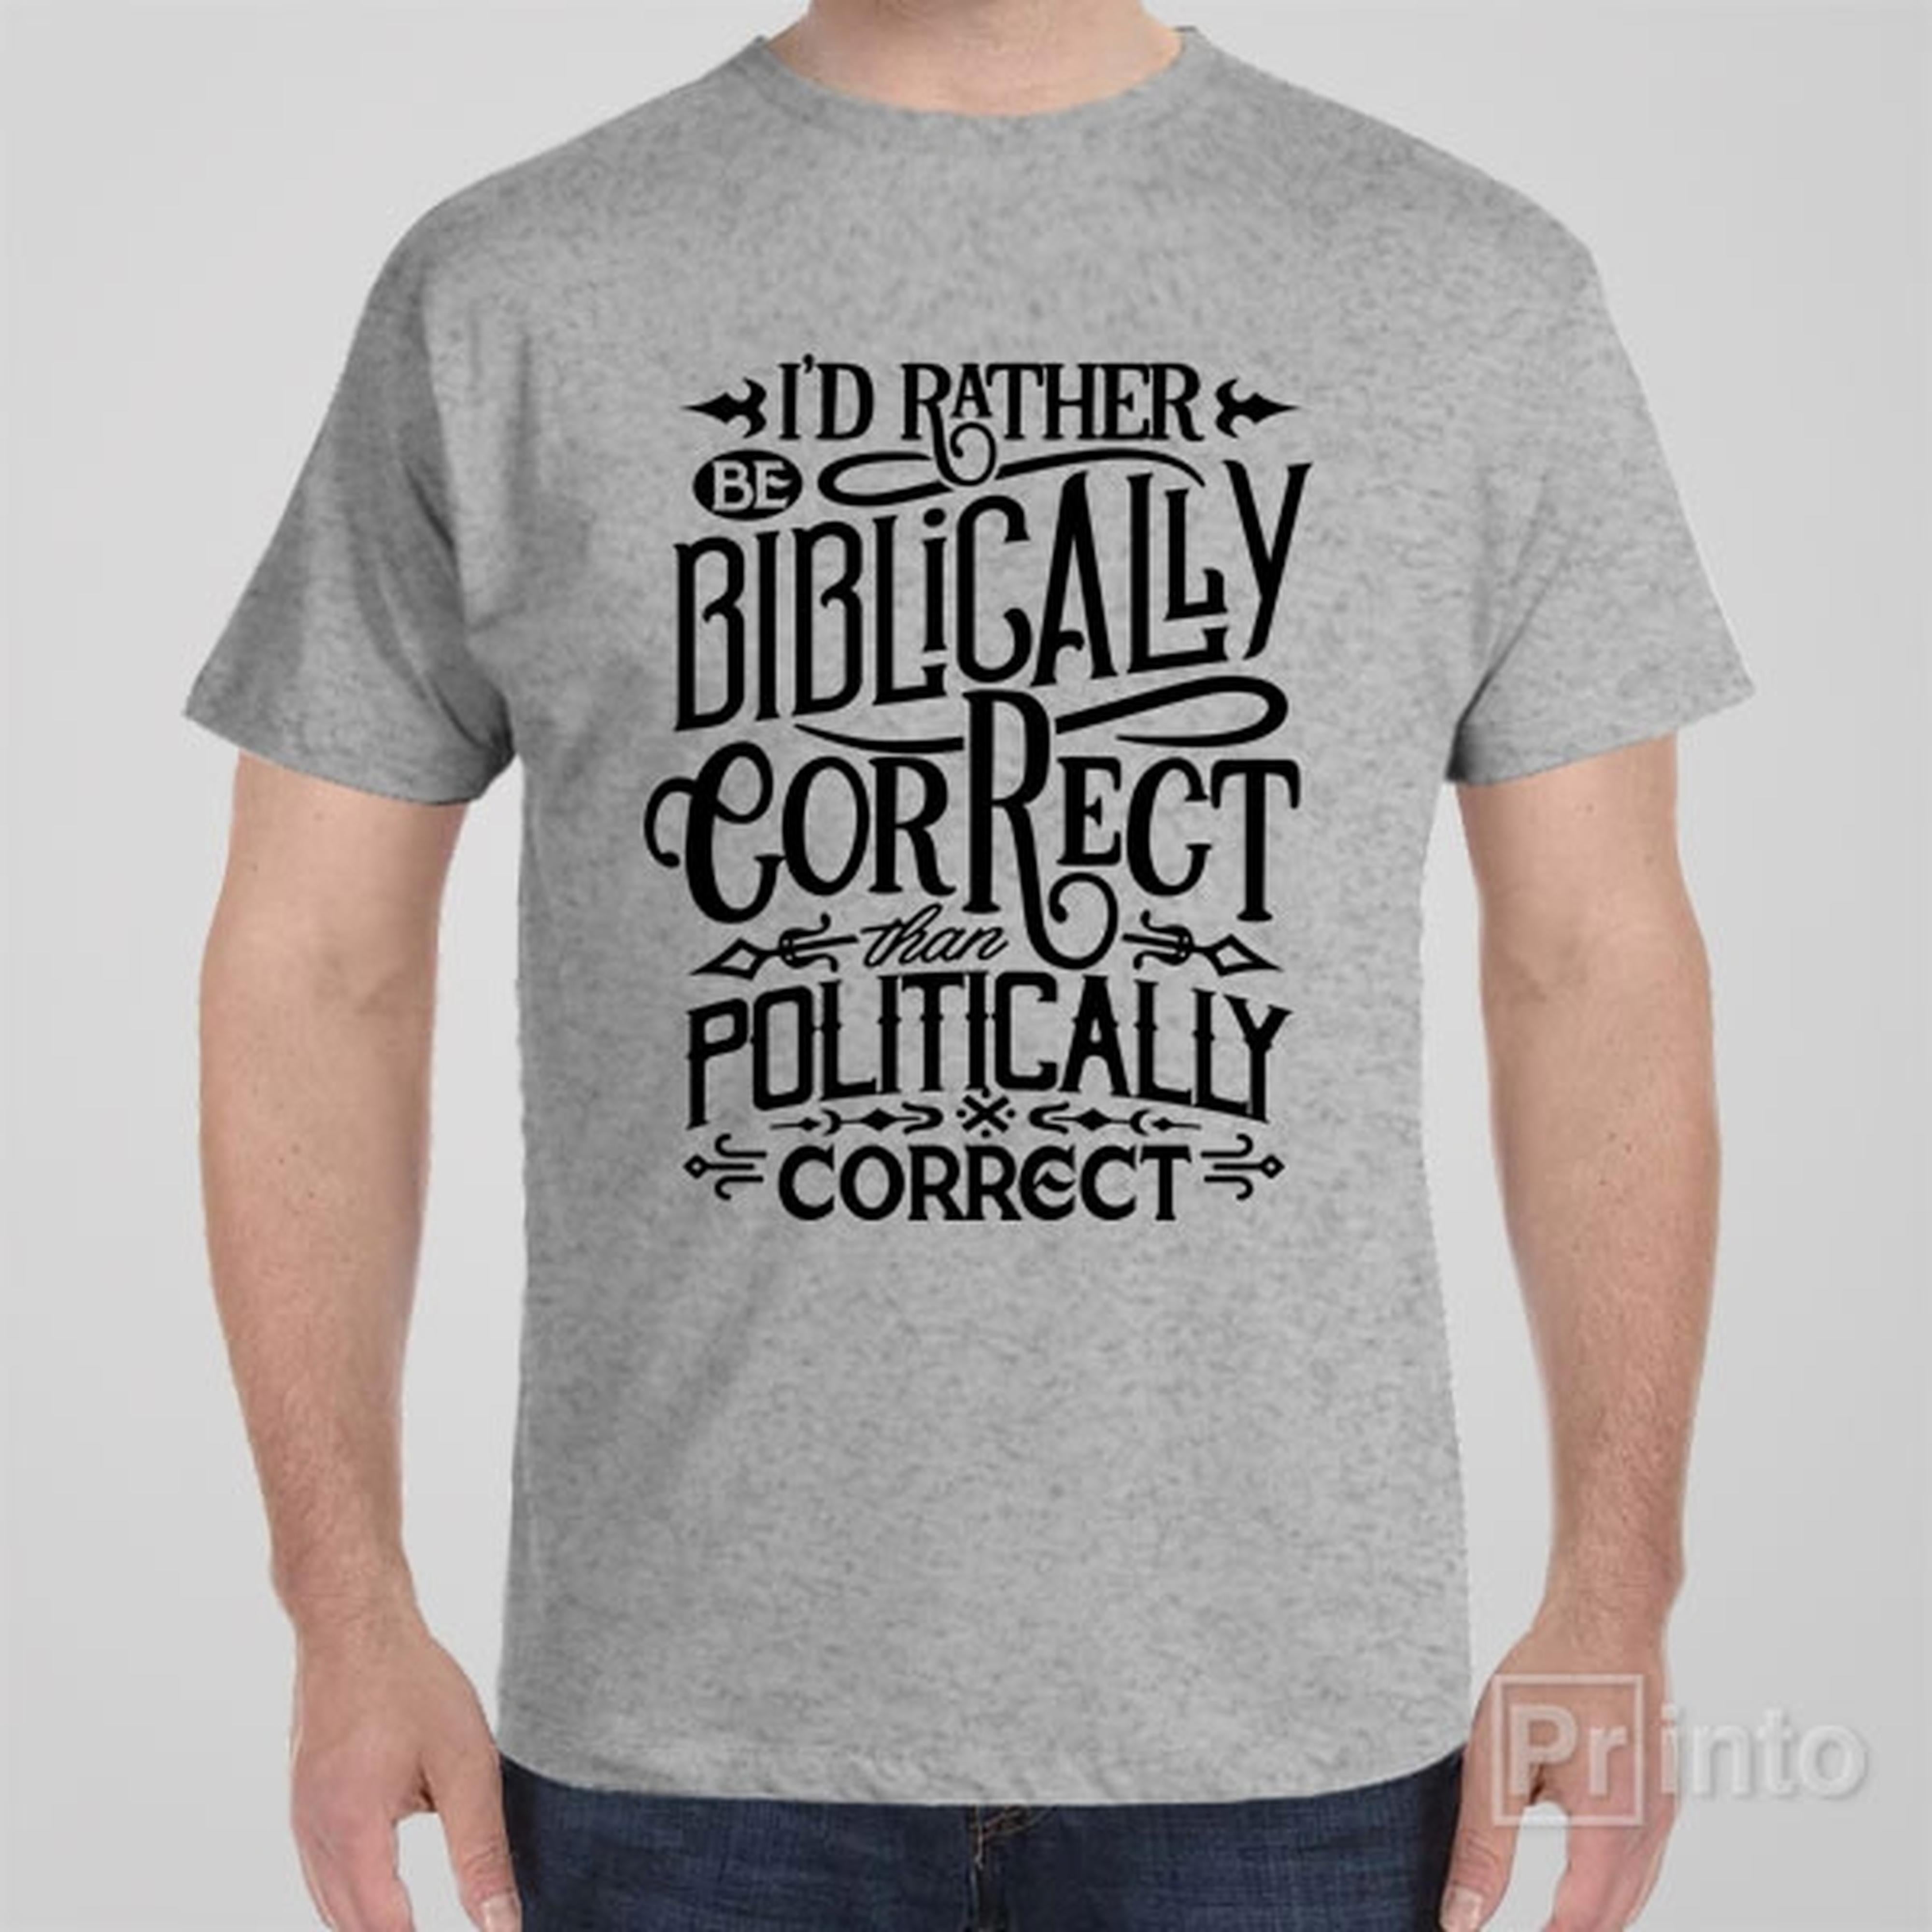 id-rather-be-biblically-correct-t-shirt